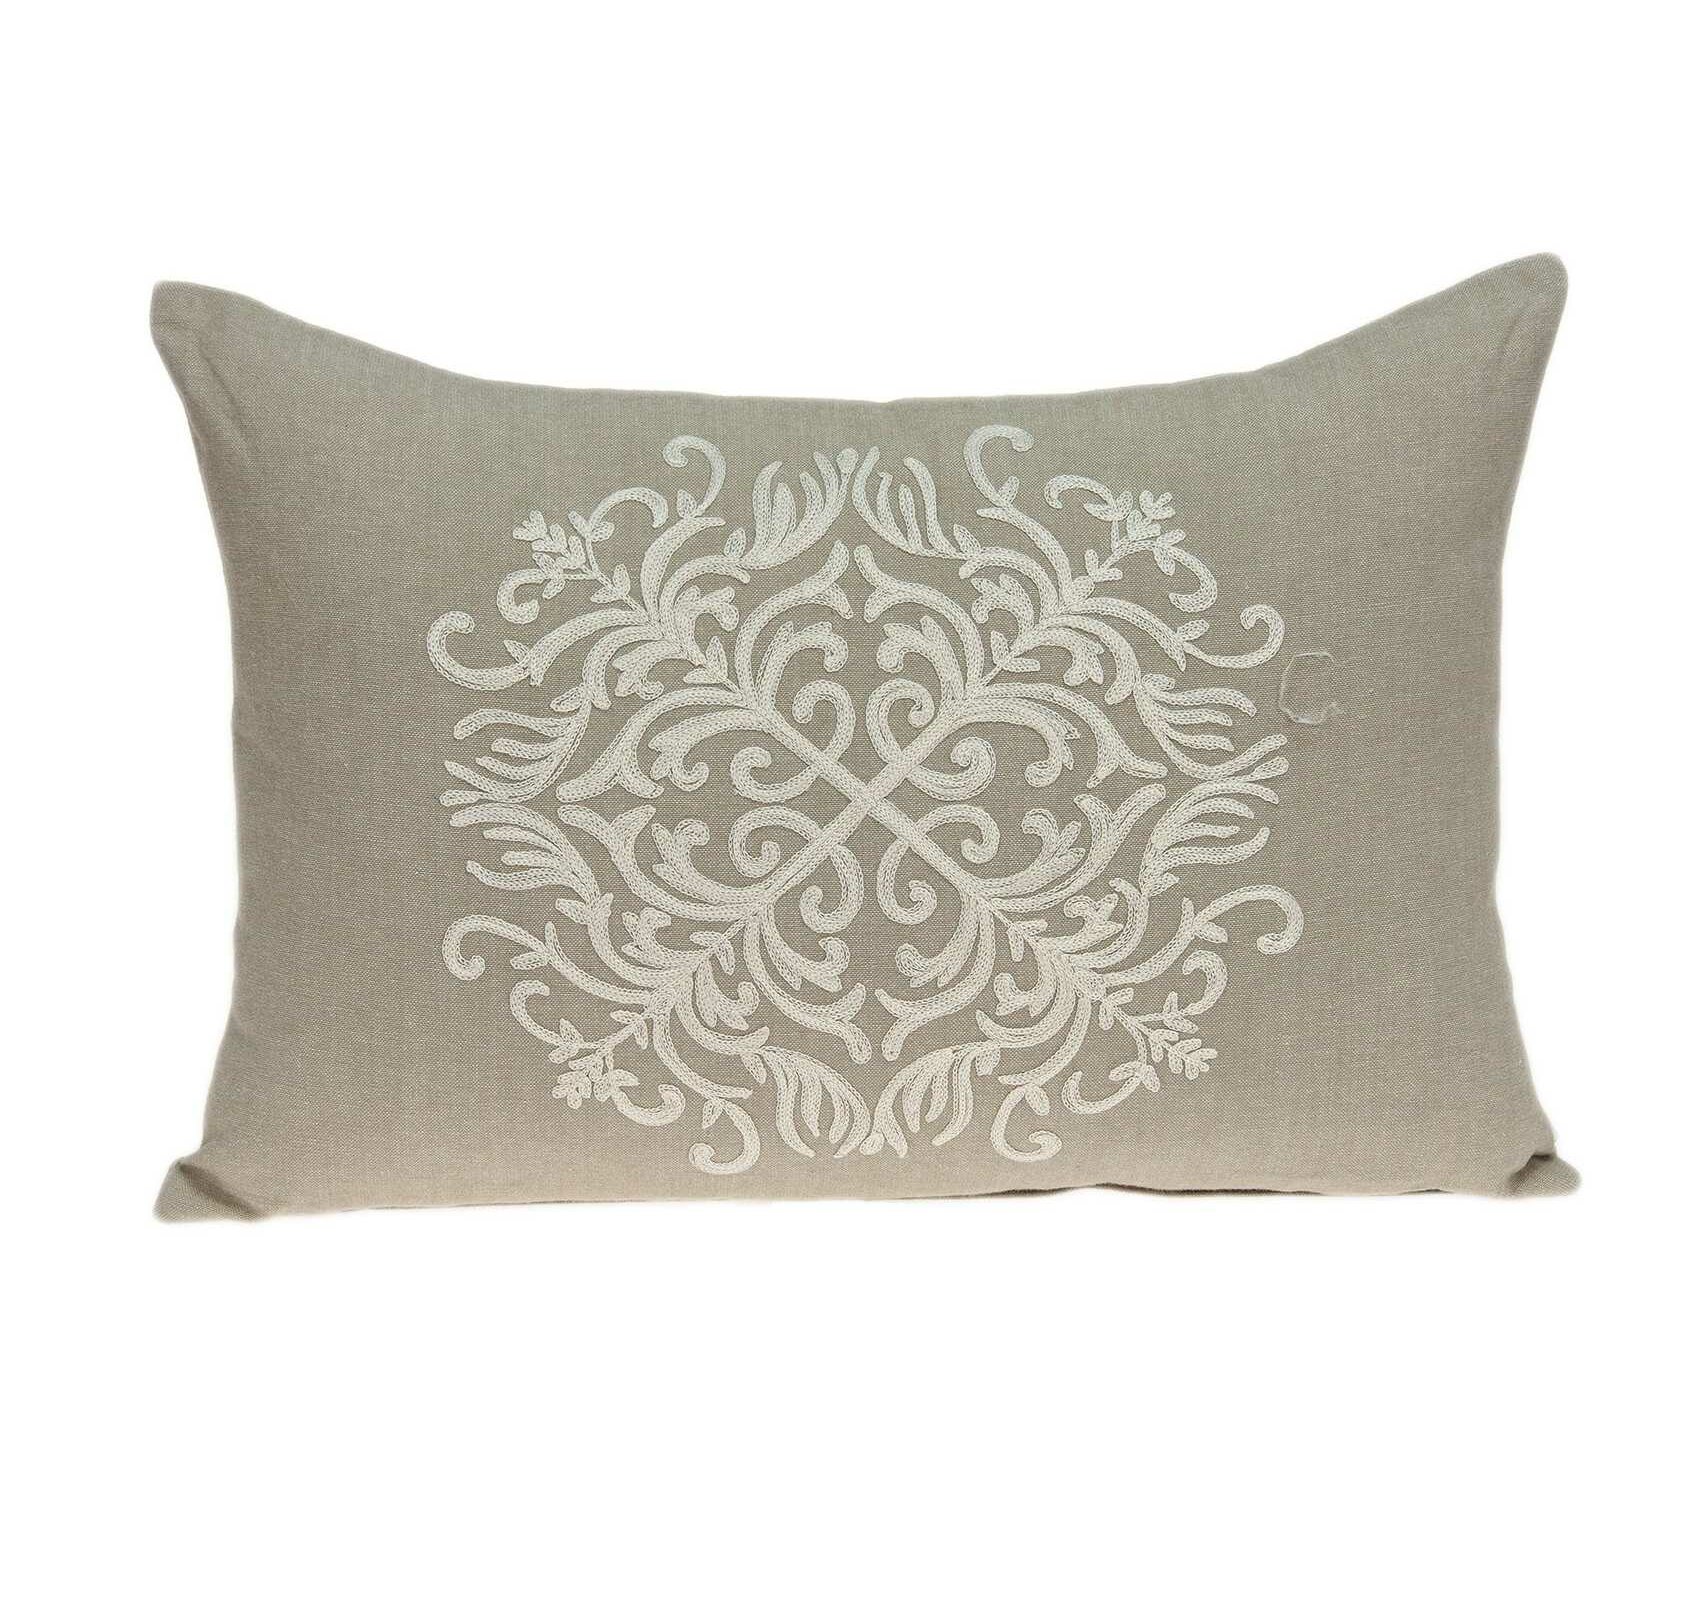 Be-you-tiful Home Charlie Blue Boudoir Pillow